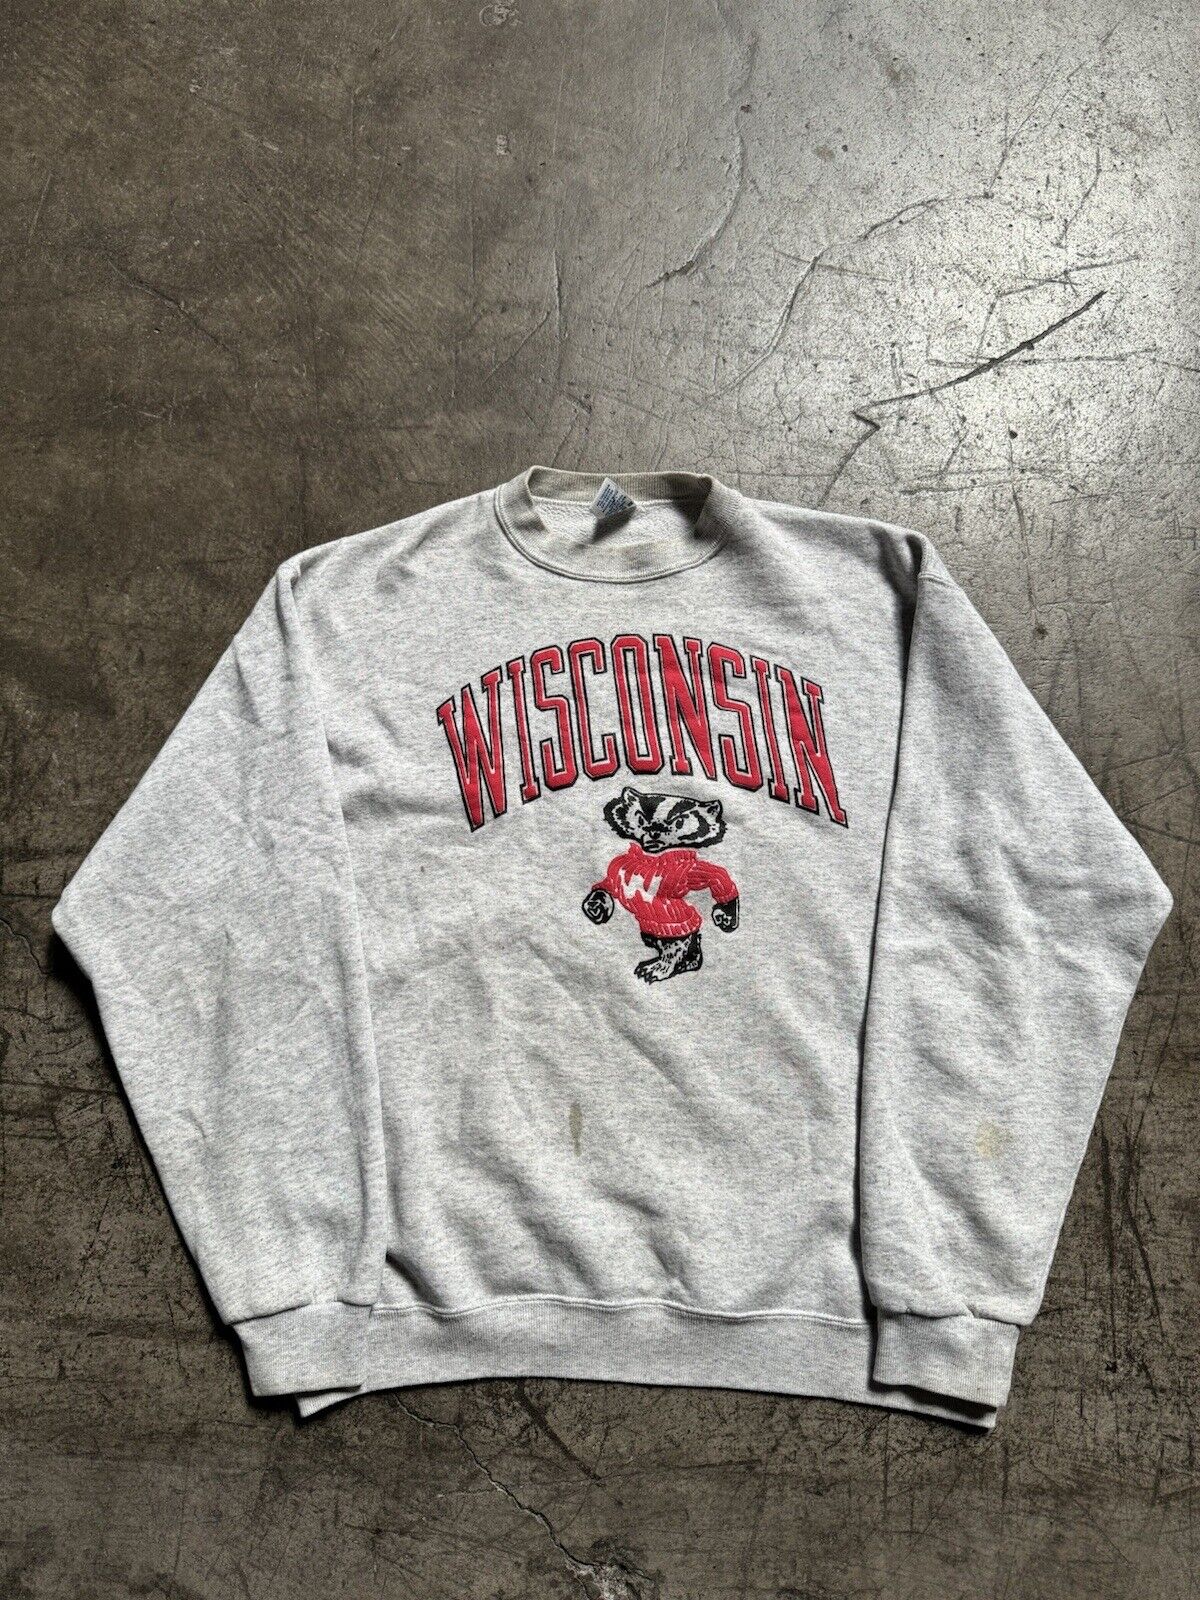 Vintage 90s Wisconsin Badgers Pullover Sweatshirt Made in USA Size Large Grey